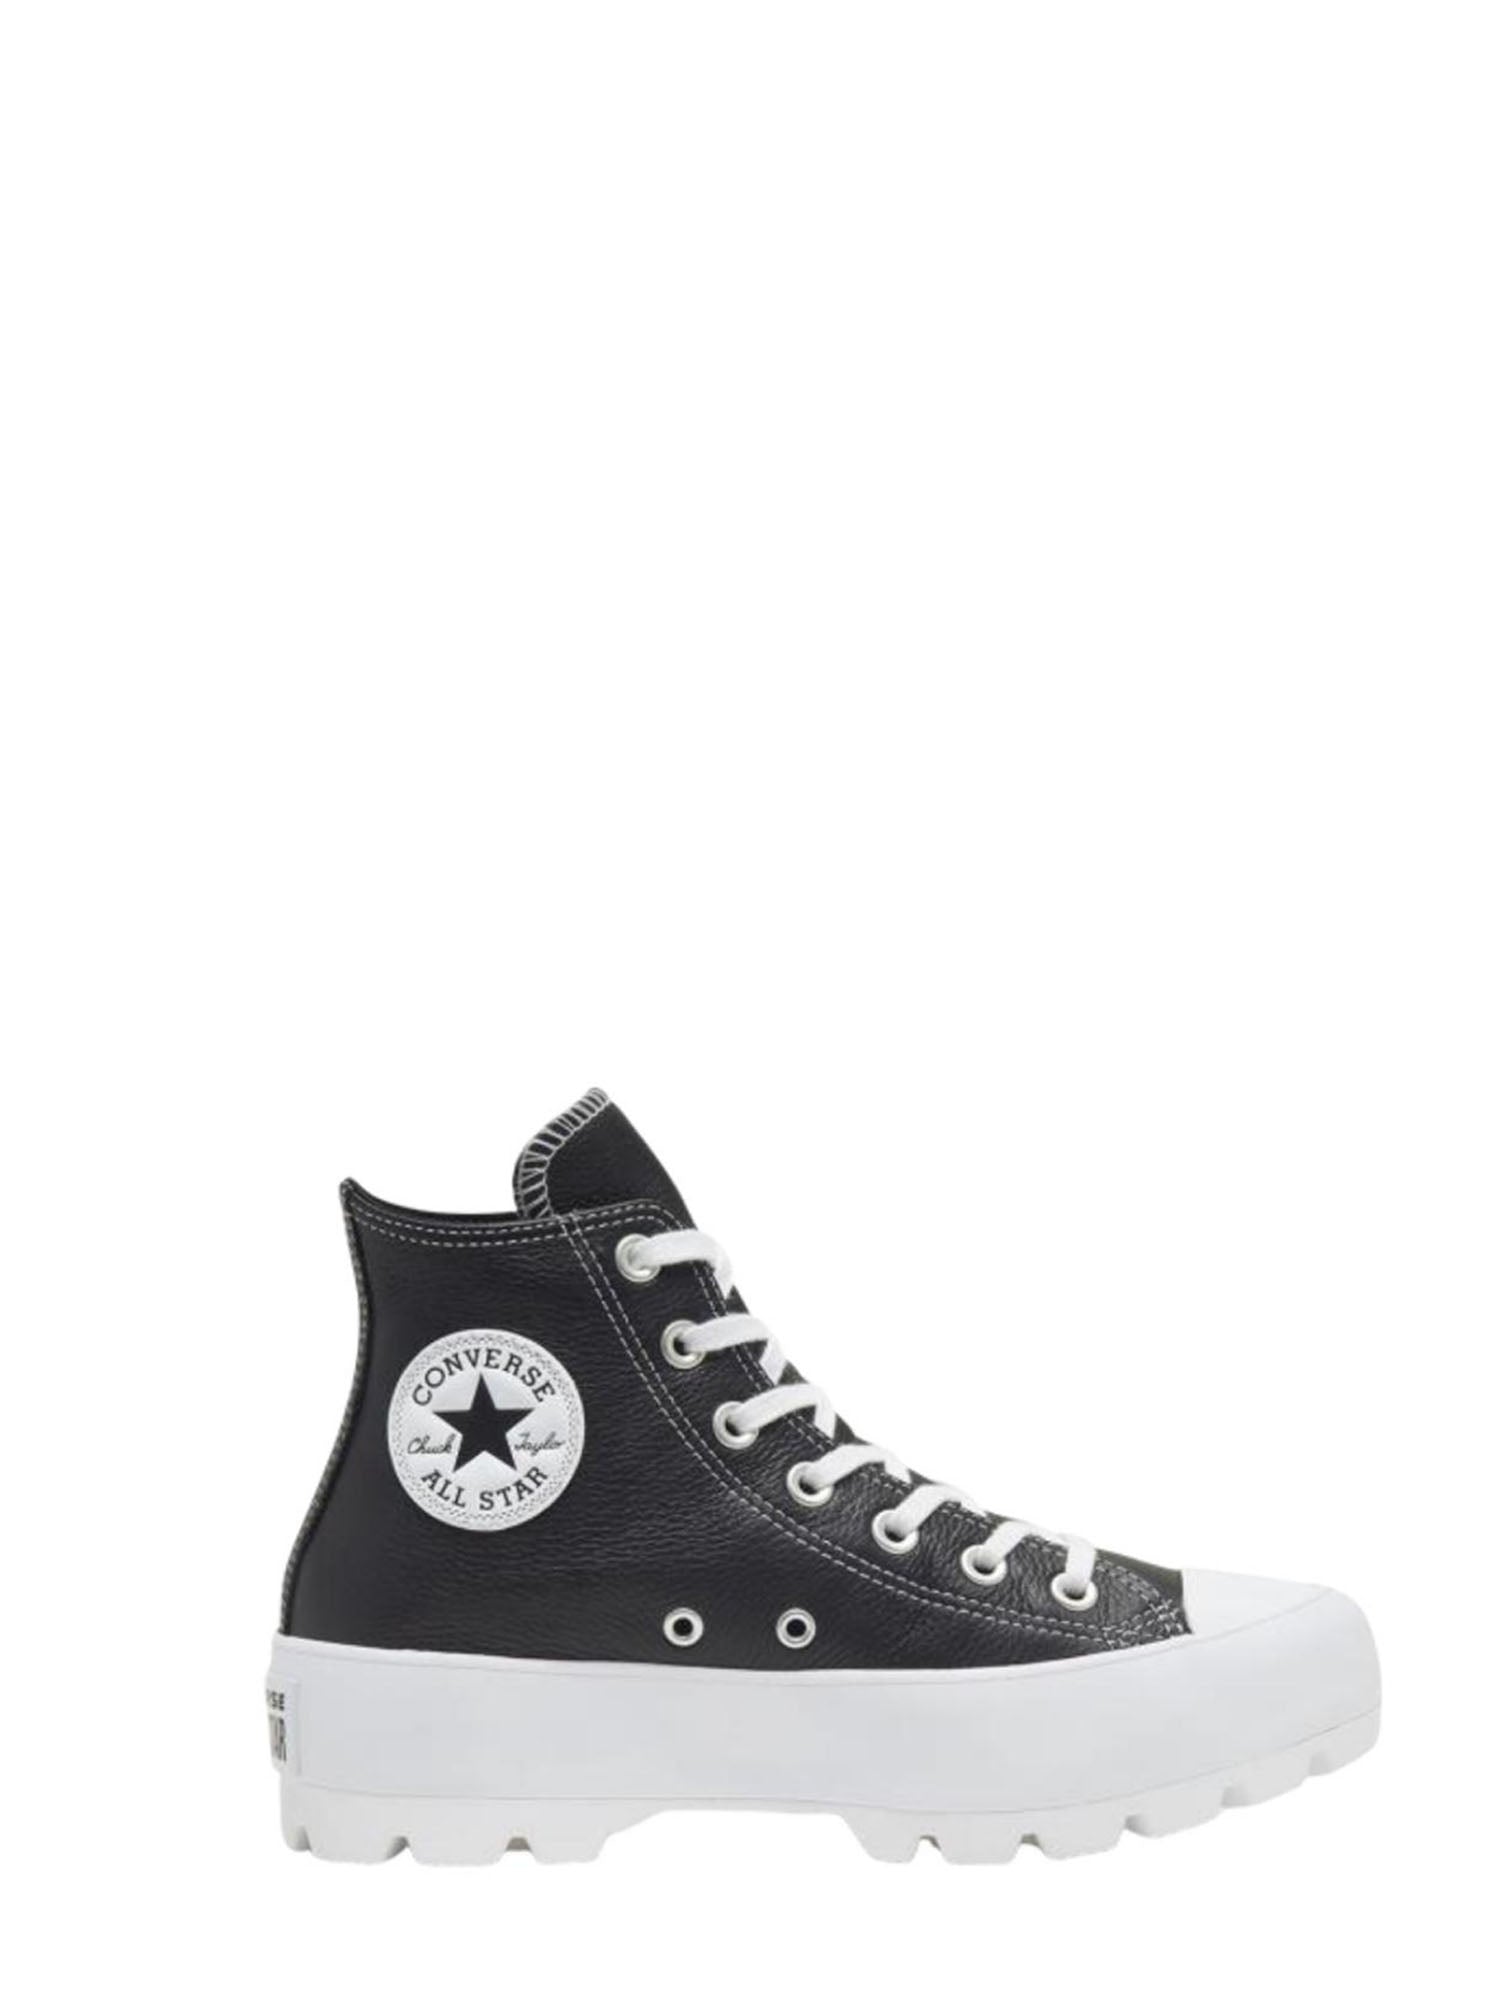 CONVERSE LUGGED LEATHER CHUCK TAYLOR ALL STAR NERO